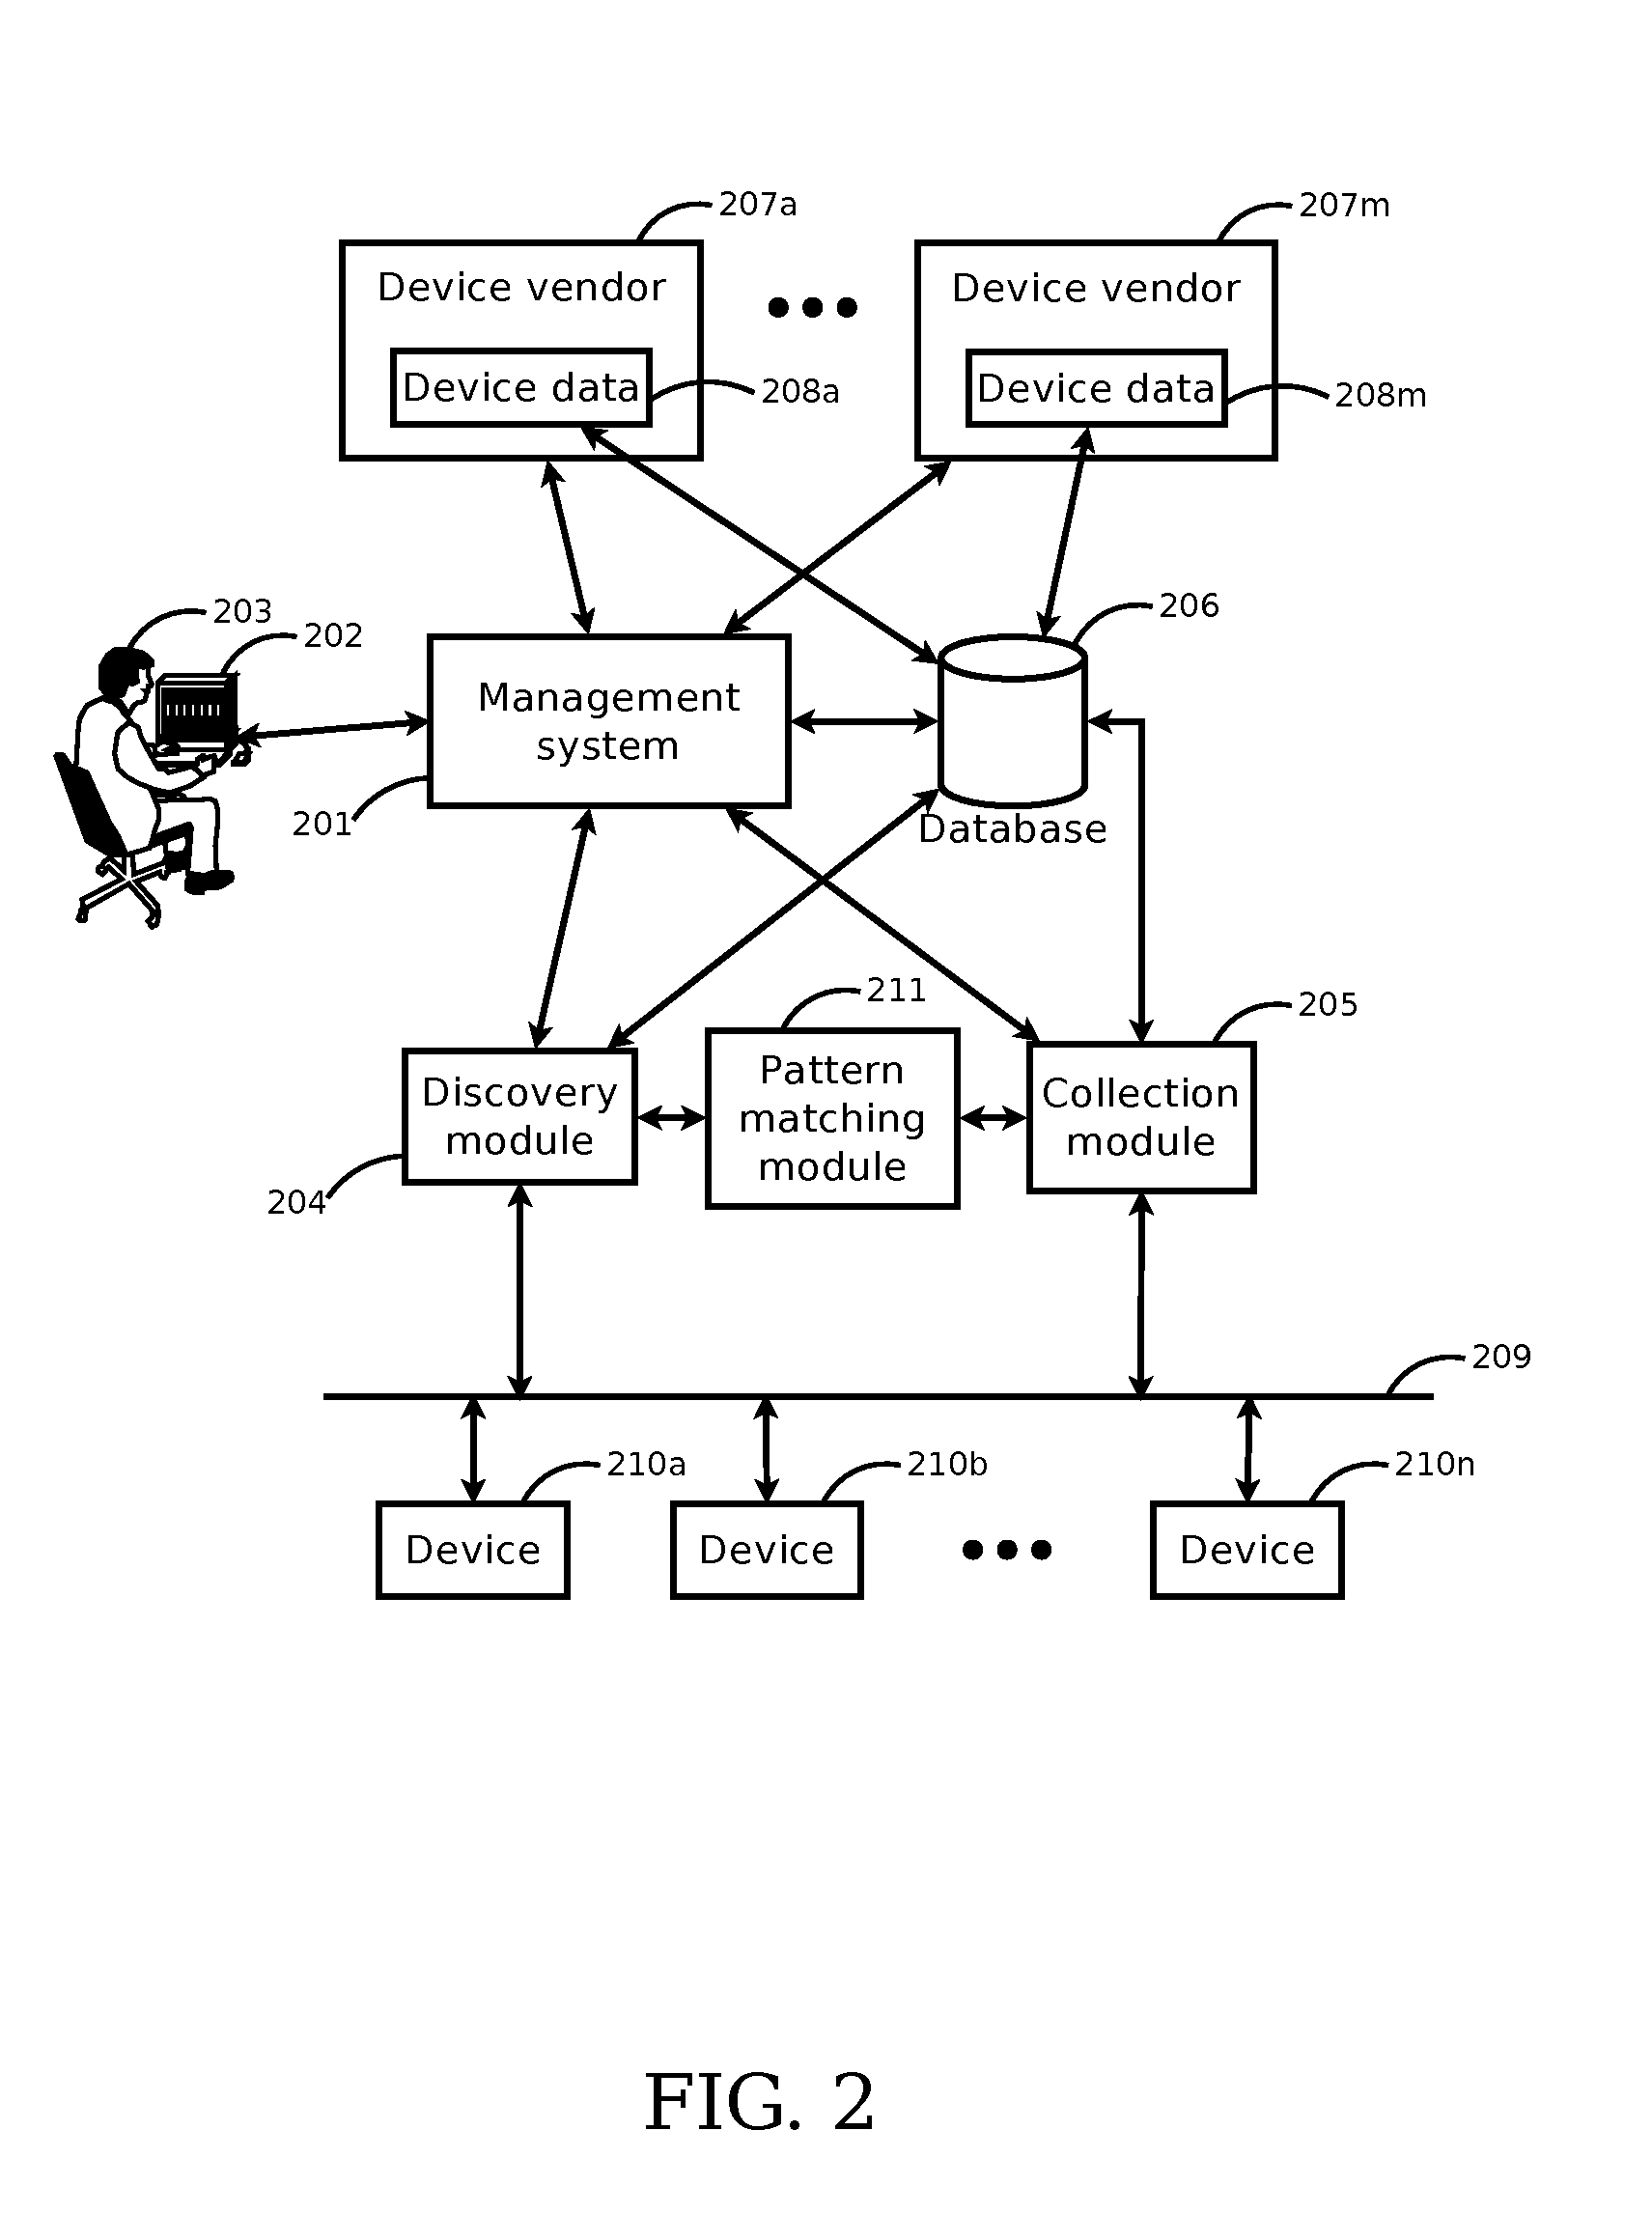 Systems and methods for discovering and monitoring devices using search patterns for object identifiers and values